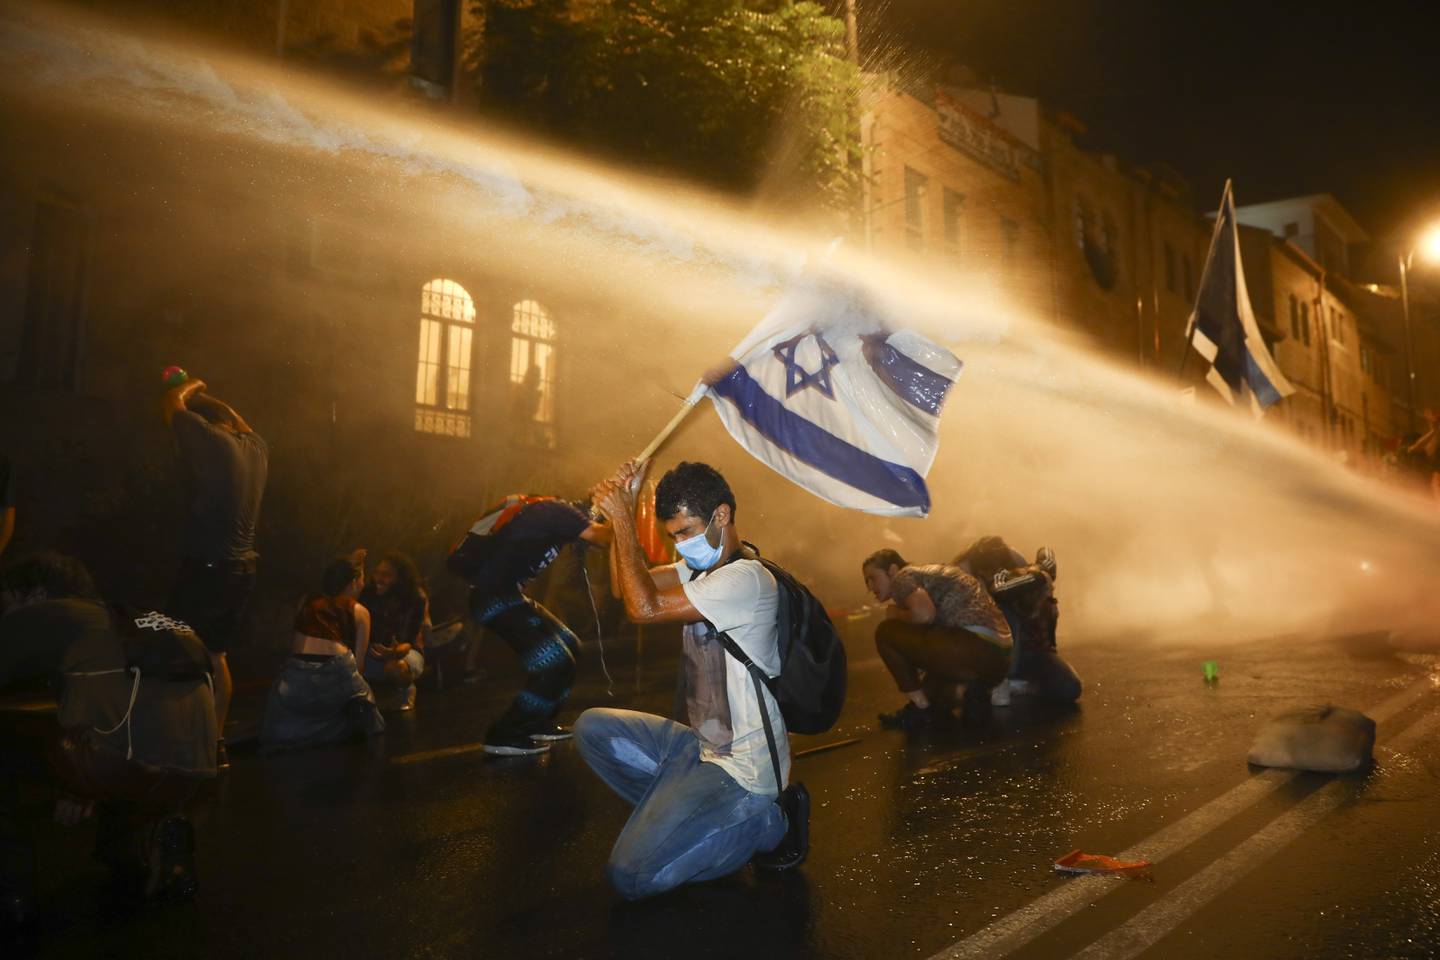 Israeli police uses water canon to disperse people during a protest against Israeli Prime Minister Benjamin Netanyahu In Jerusalem Saturday, July 18, 2020. Protesters demanded that the embattled Israeli leader to resign as he faces a trial on corruption charges and grapples with a deepening coronavirus crisis. (AP Photo/Oded Balilty)